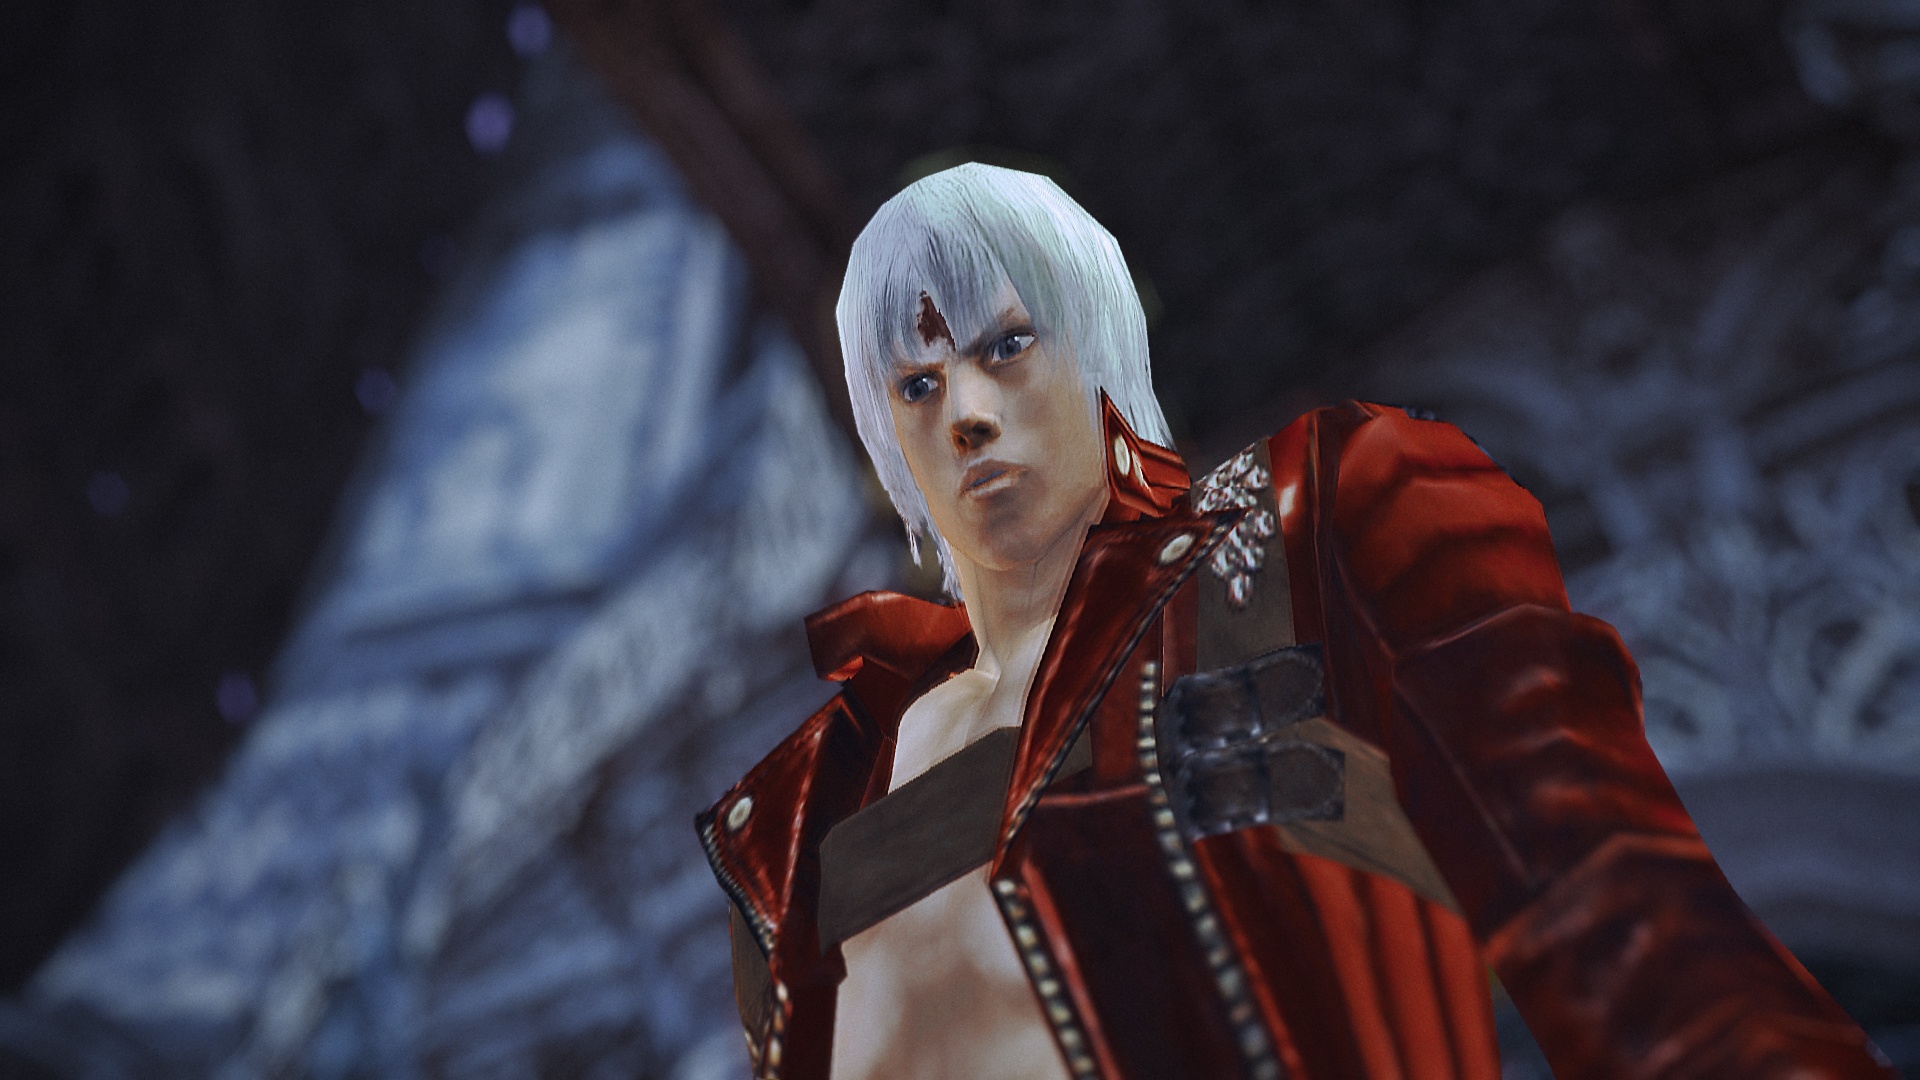 Номер данте. Devil May Cry 3 Dante s Awakening. Данте ДМС 3. Devil May Cry 3 Dante. DMC 3 Special Edition.